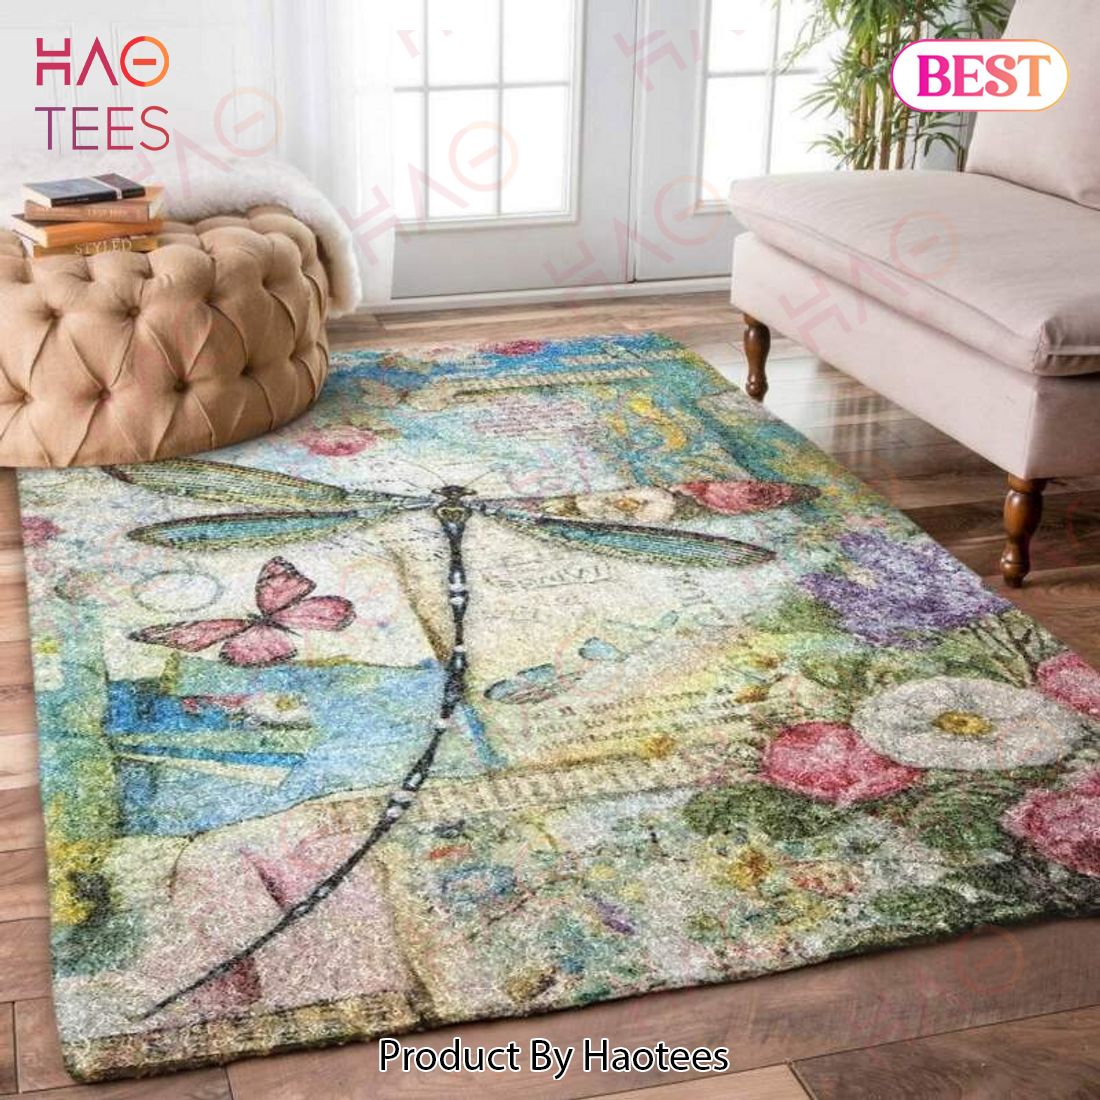 Dragonfly Limited Edition Area Rugs Carpet Mat Kitchen Rugs Floor Decor – SZ61